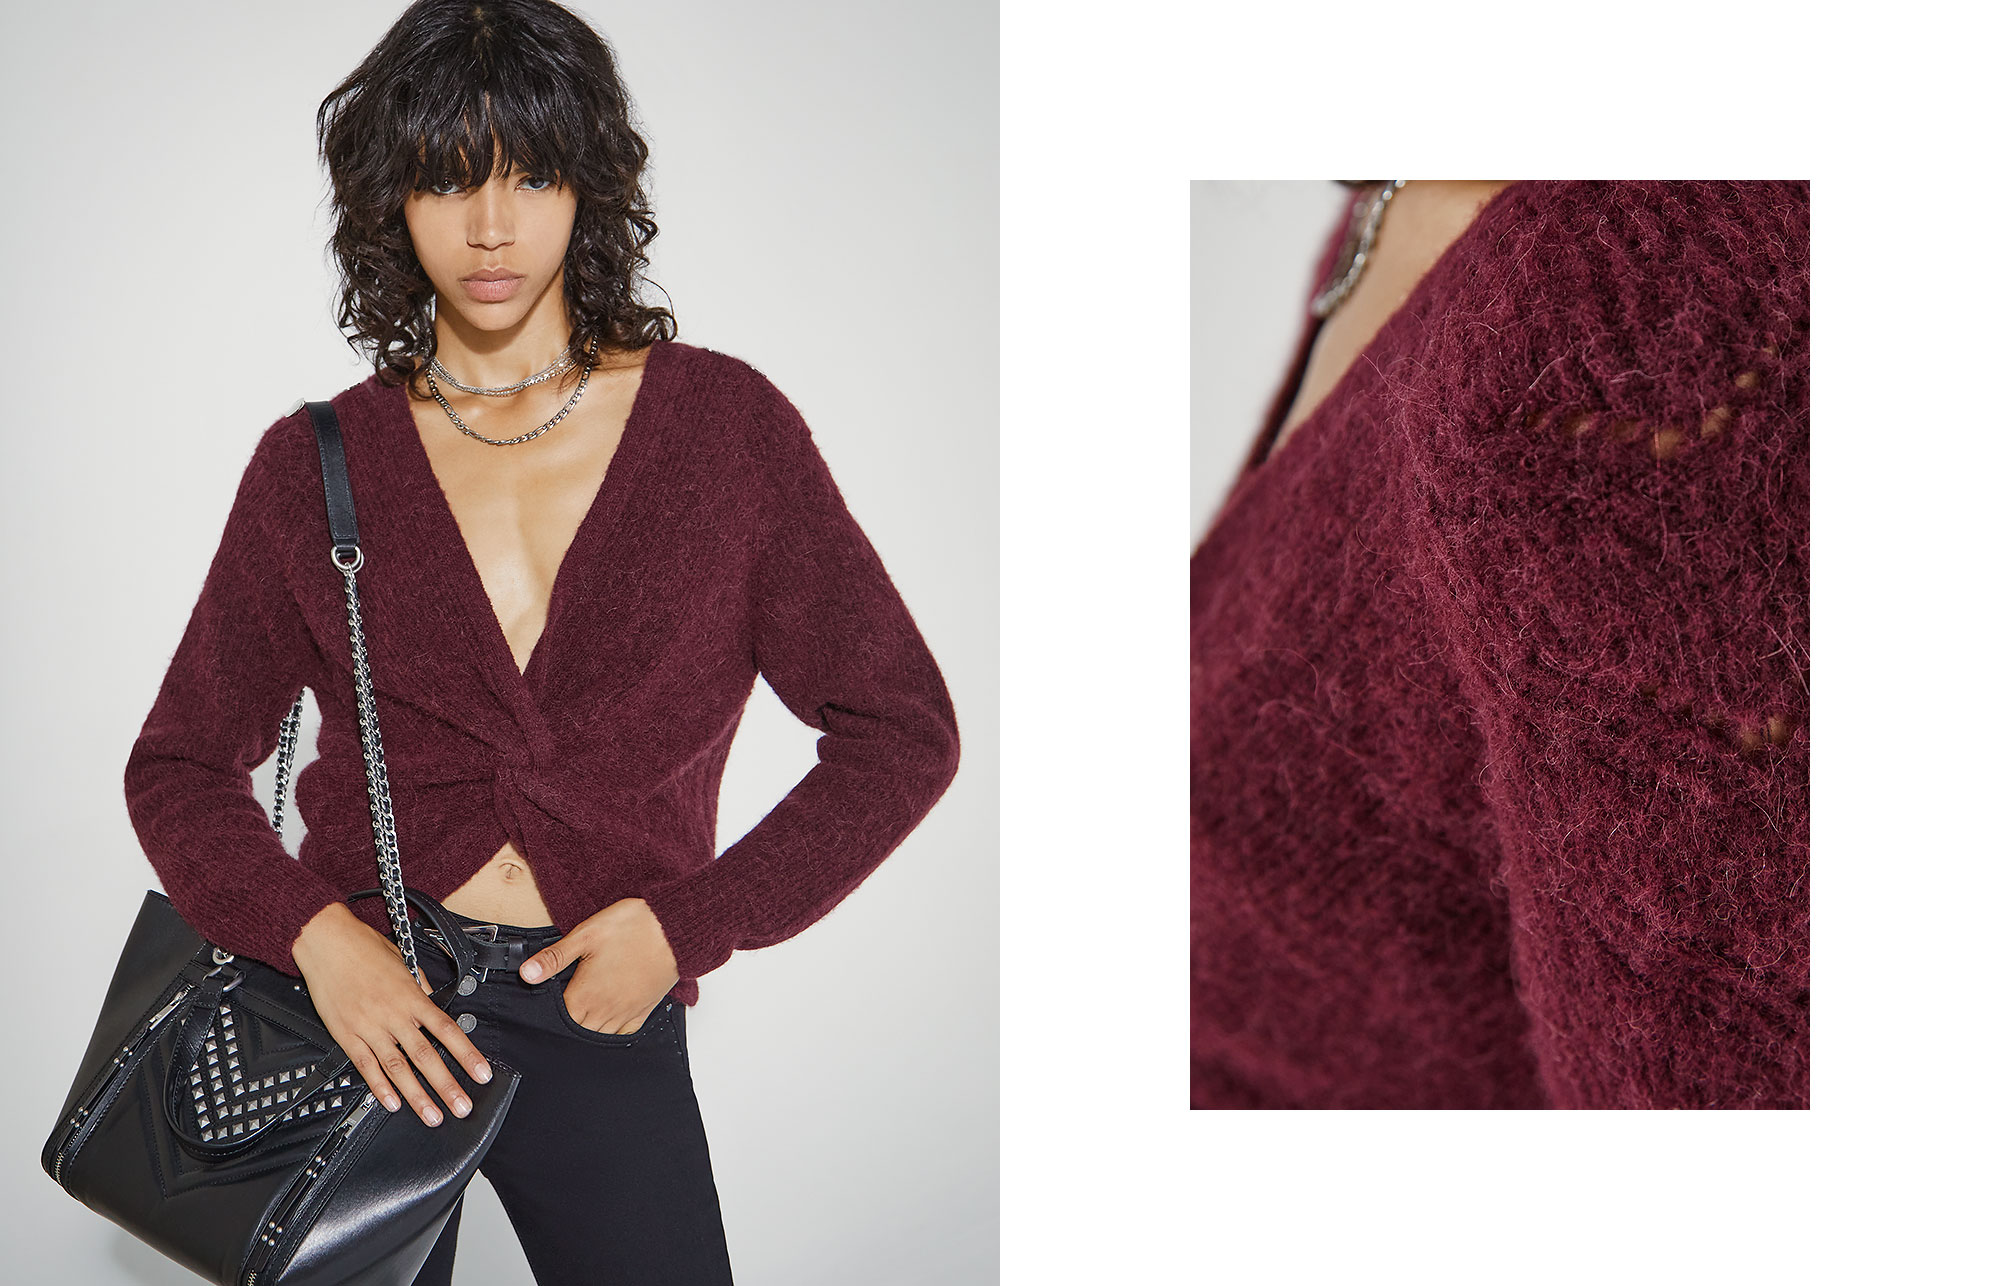 Women’s burgundy openwork knit sweater with open back